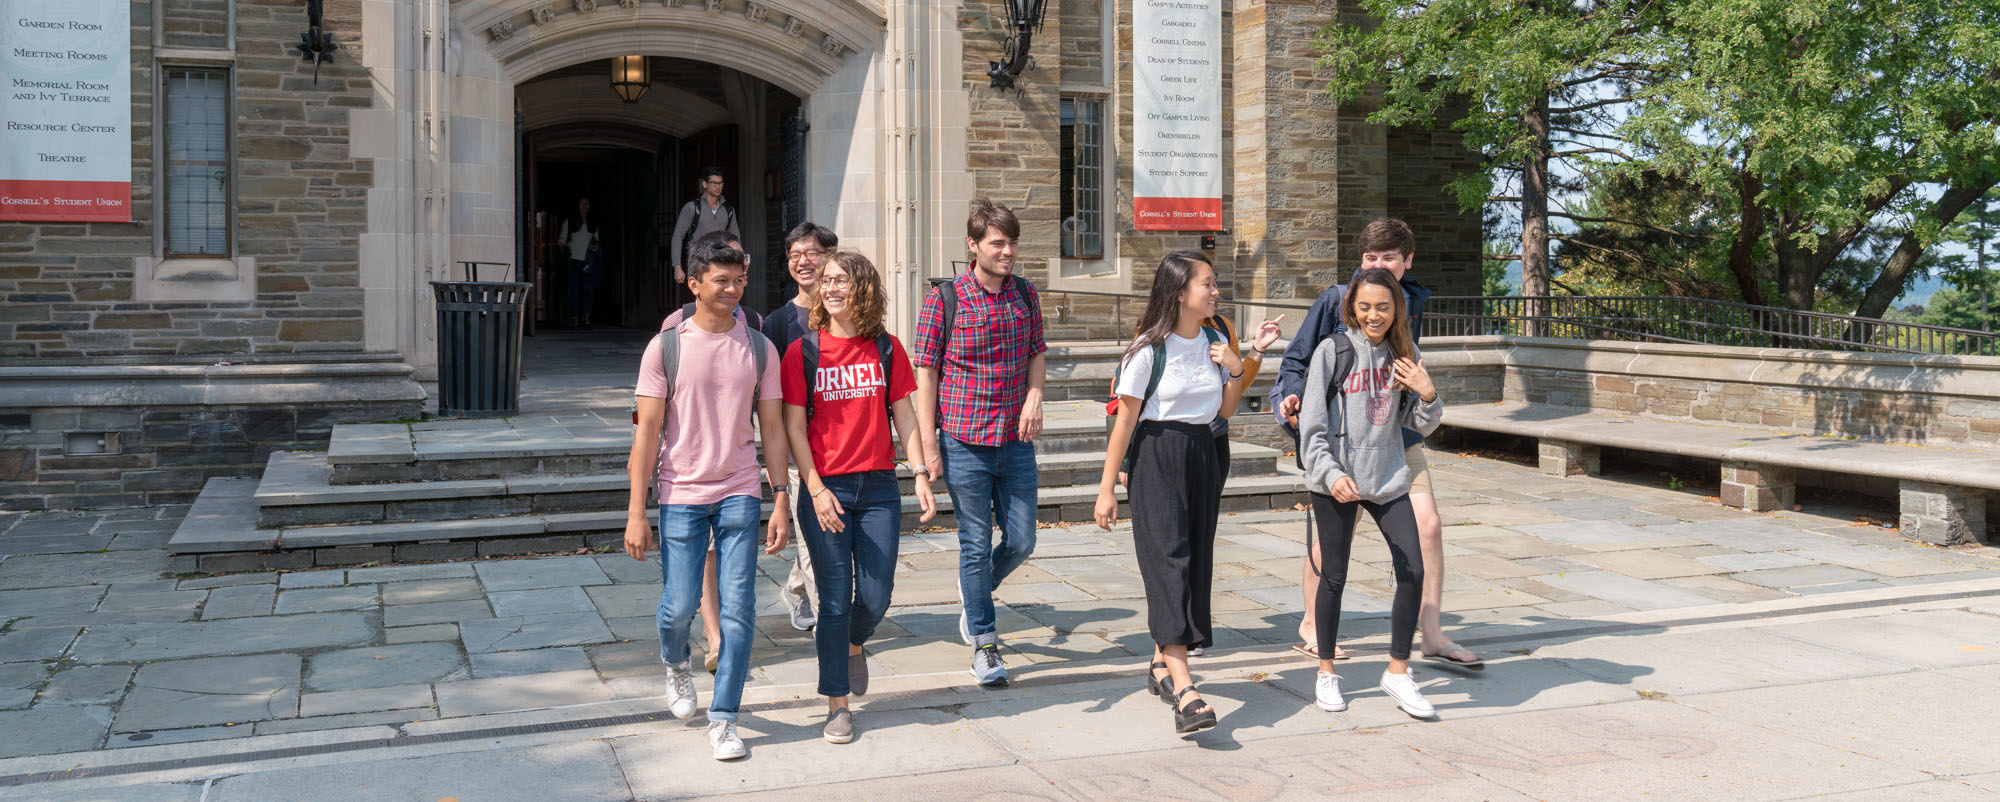 Students walking and talking outside of Willard Straight Hall on Ho Plaza